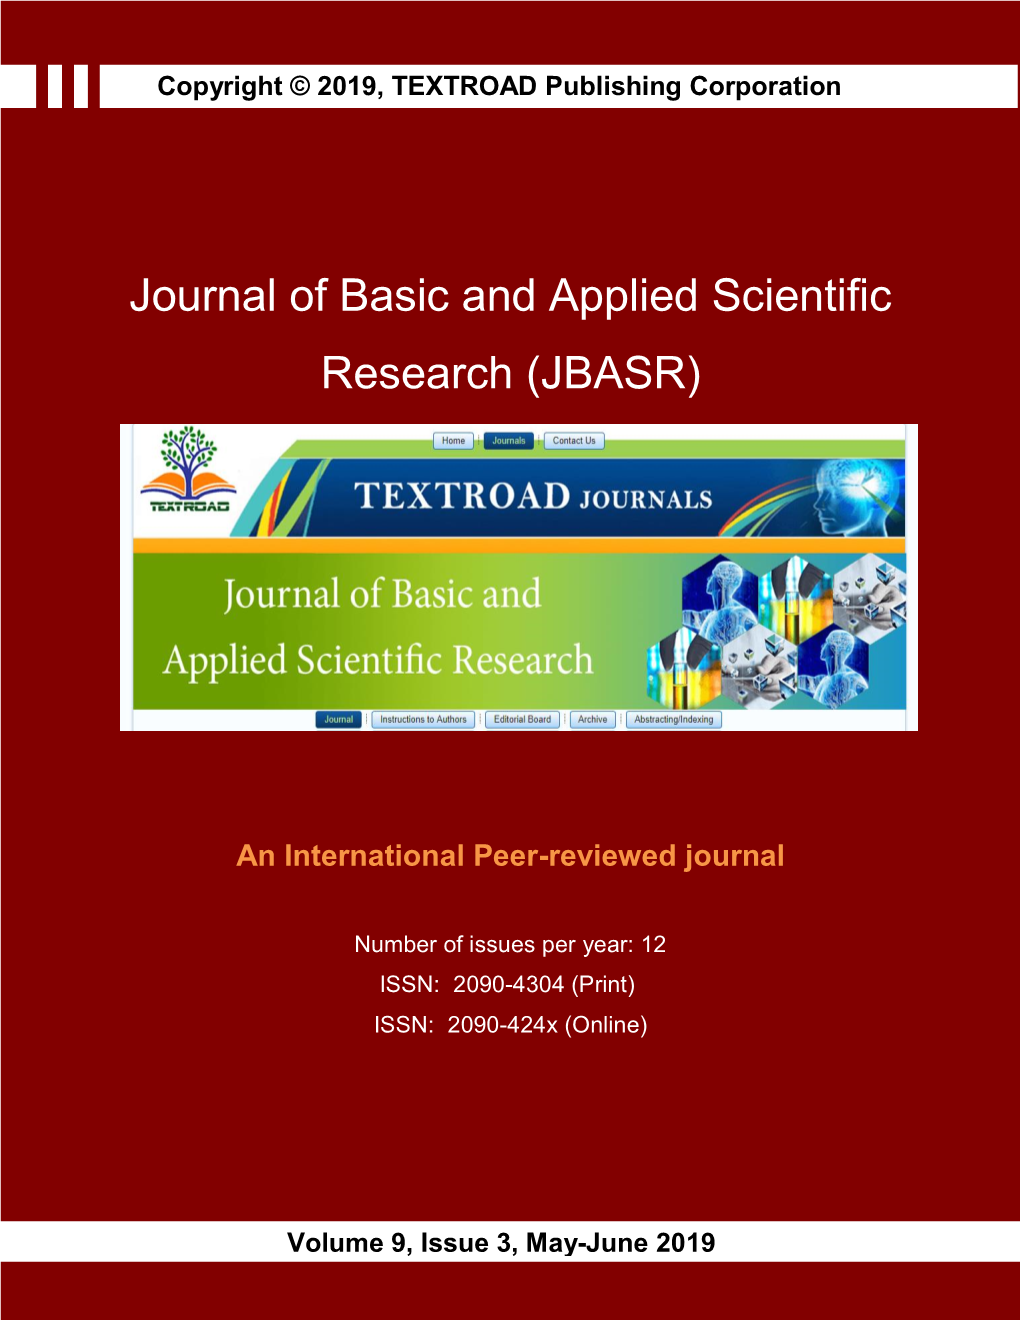 Journal of Basic and Applied Scientific Research (JBASR)